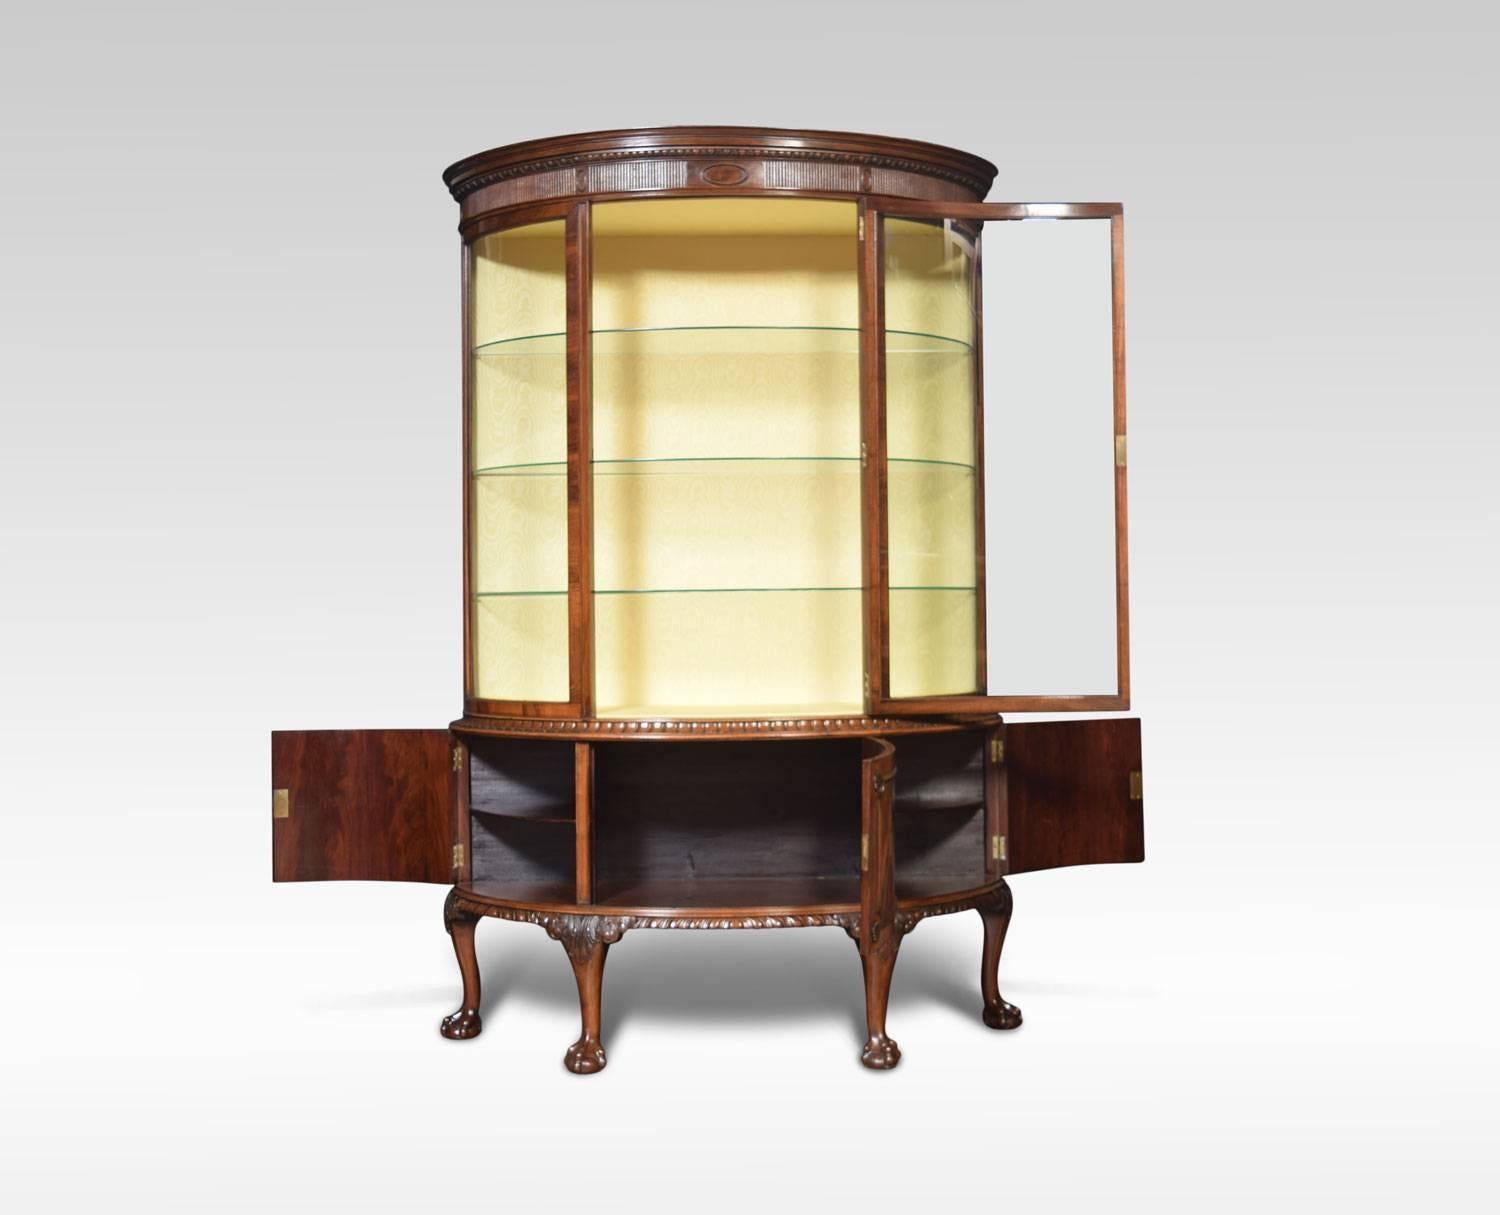 Early 20th century flame mahogany bow fronted display cabinet, having egg and dart moulded cornice, above large glazed door opening to reveal watermark silk upholstered interior with three glazed shelves. The base section fitted with three cupboard